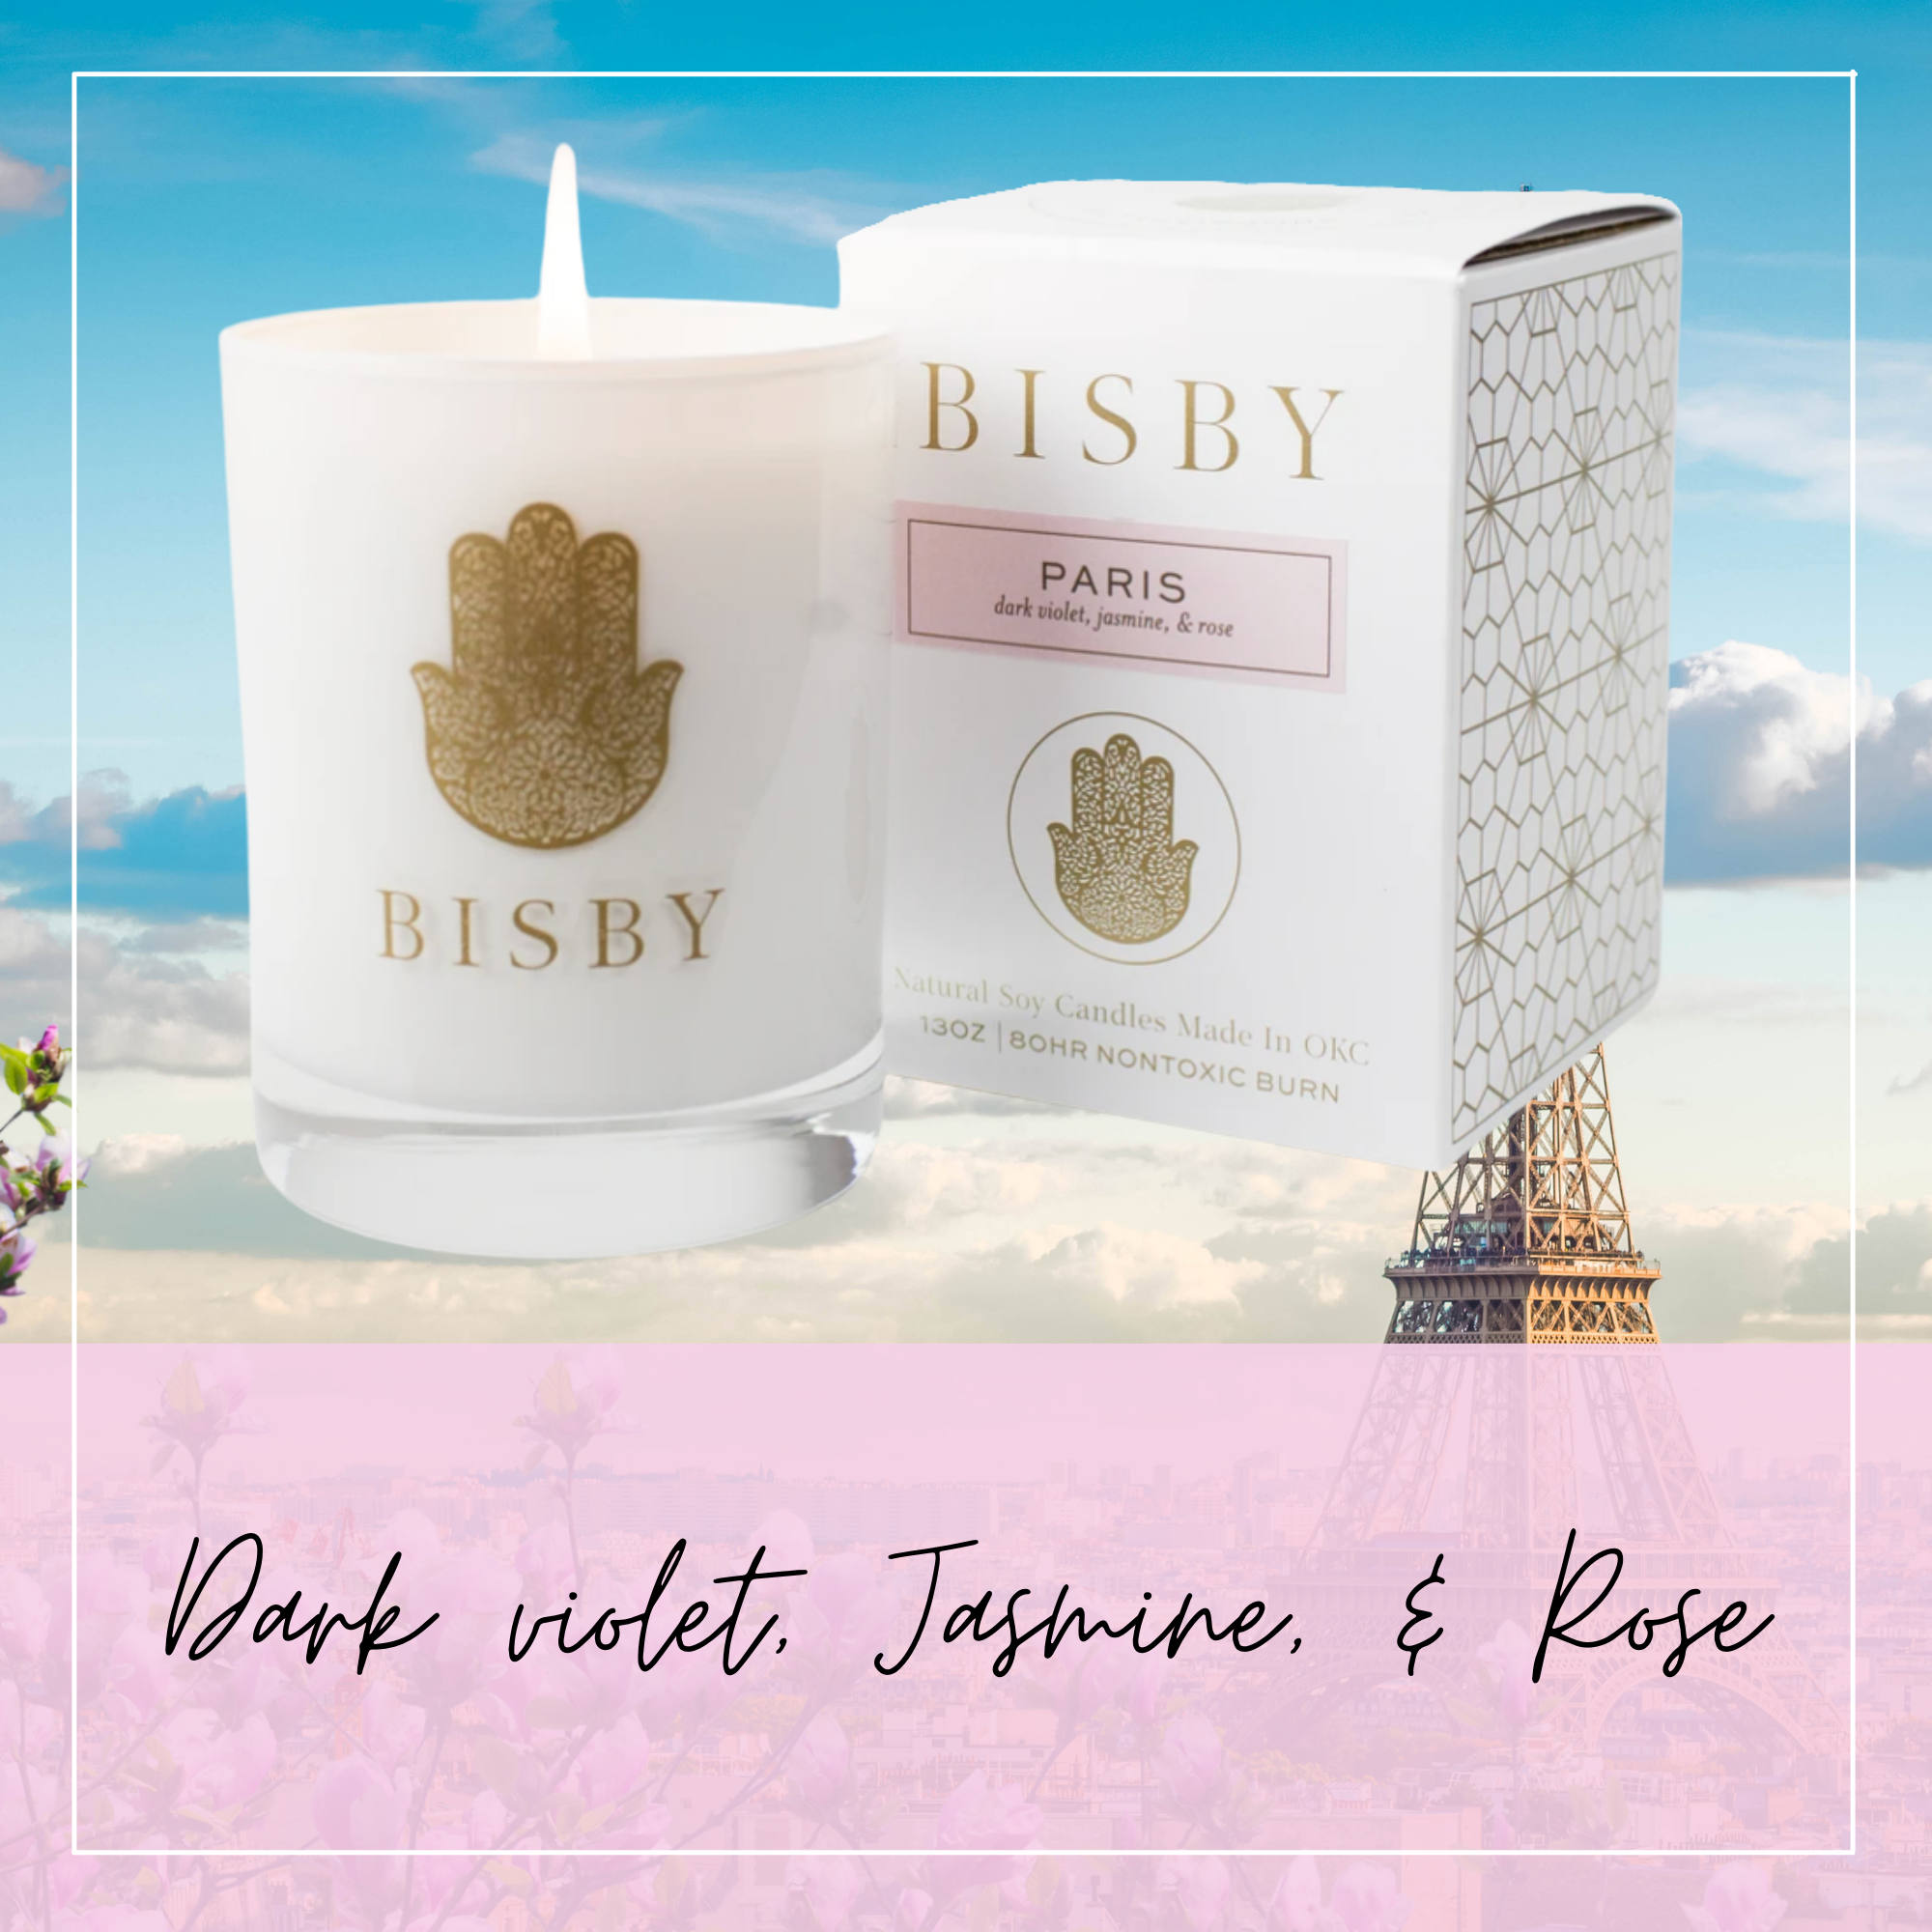 Bisby Hand-Poured Soy Candles - Global Collection Paris 